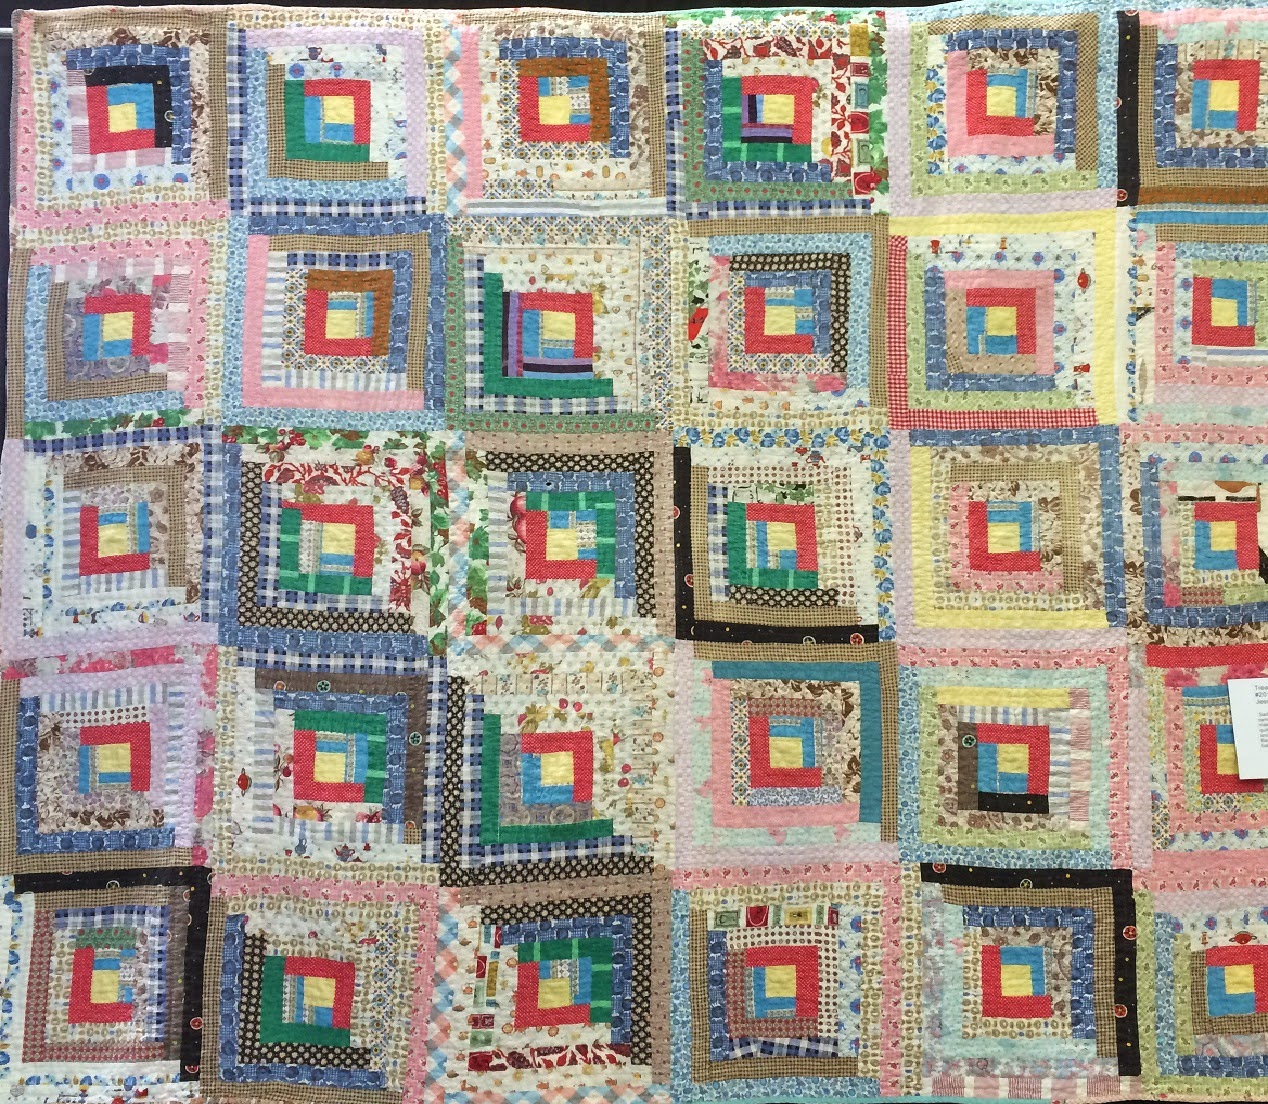 Butterfly Threads: Quilt Show and Tell